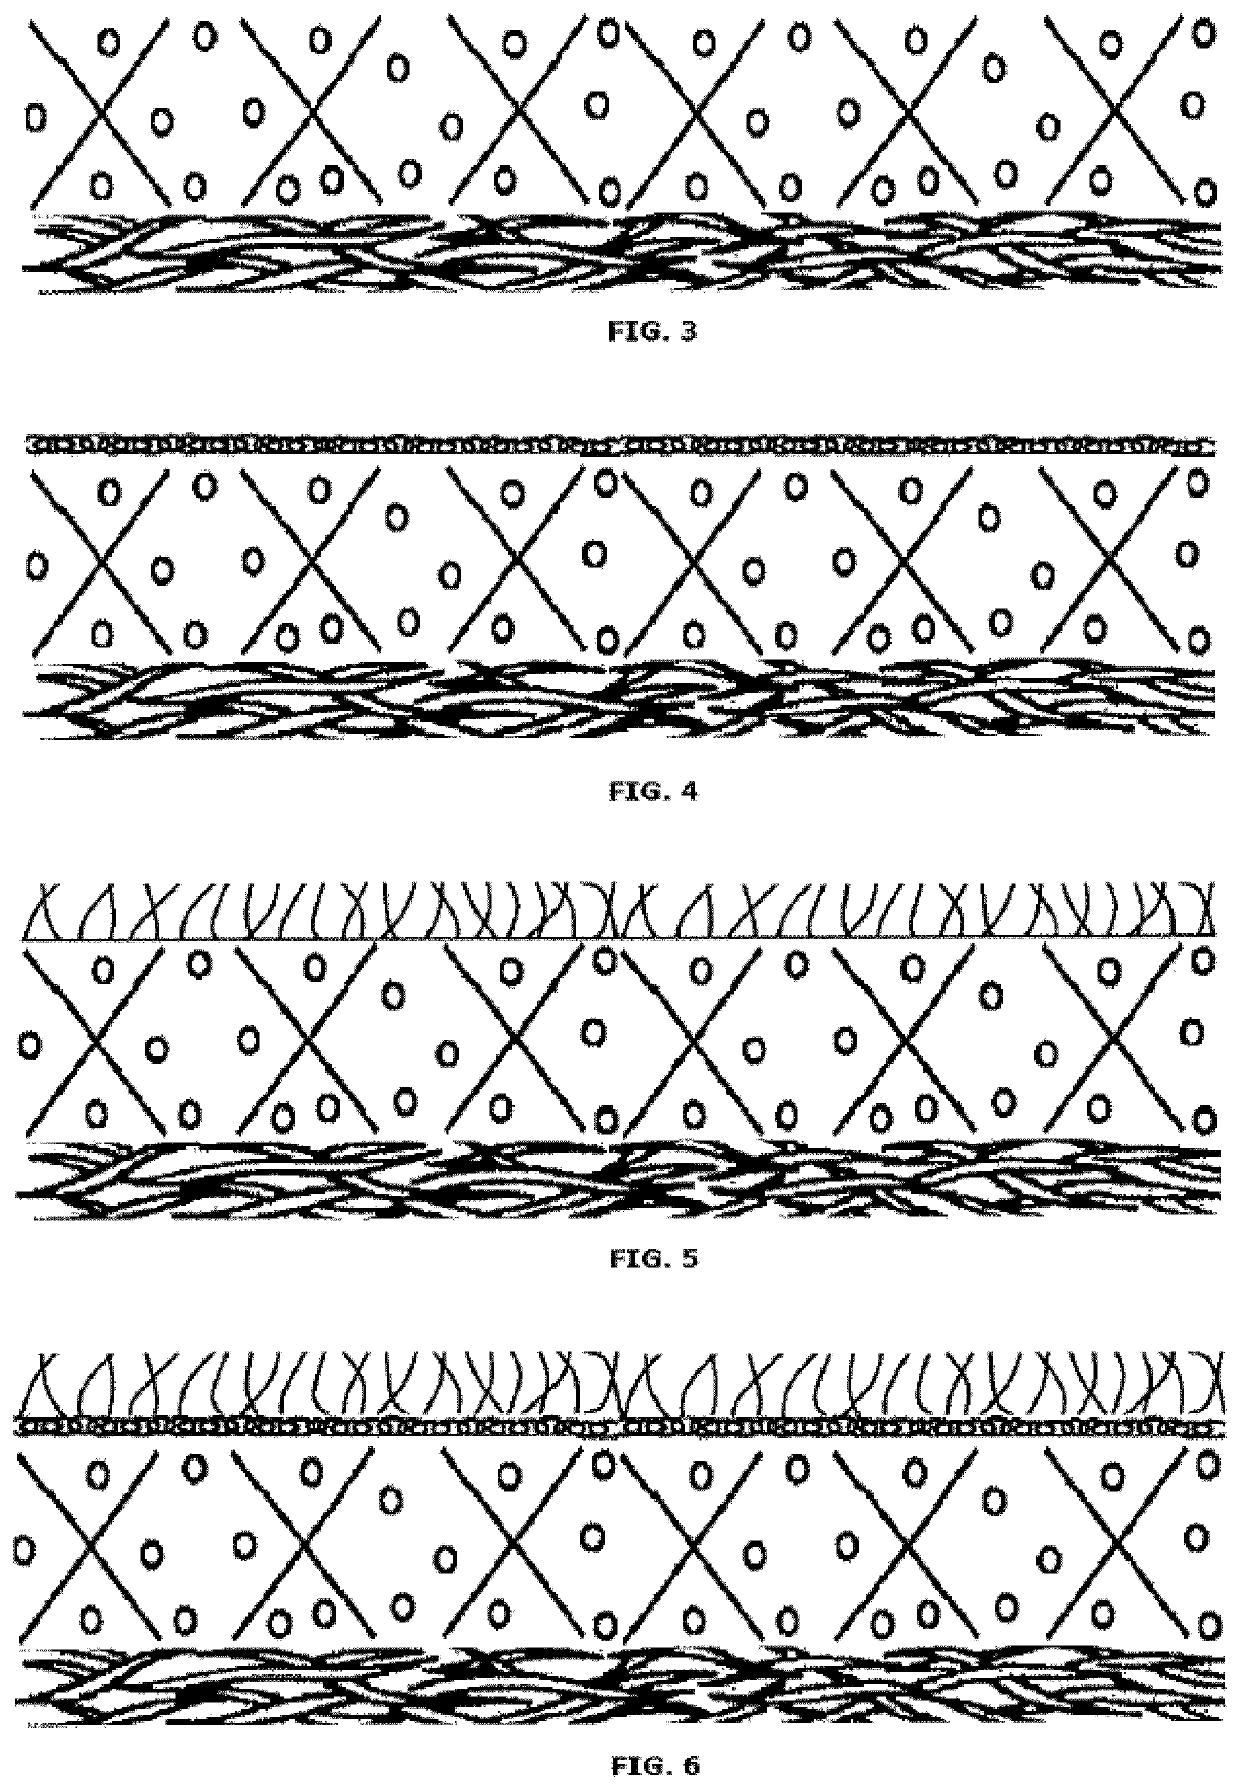 Absorbent structure comprising release structure